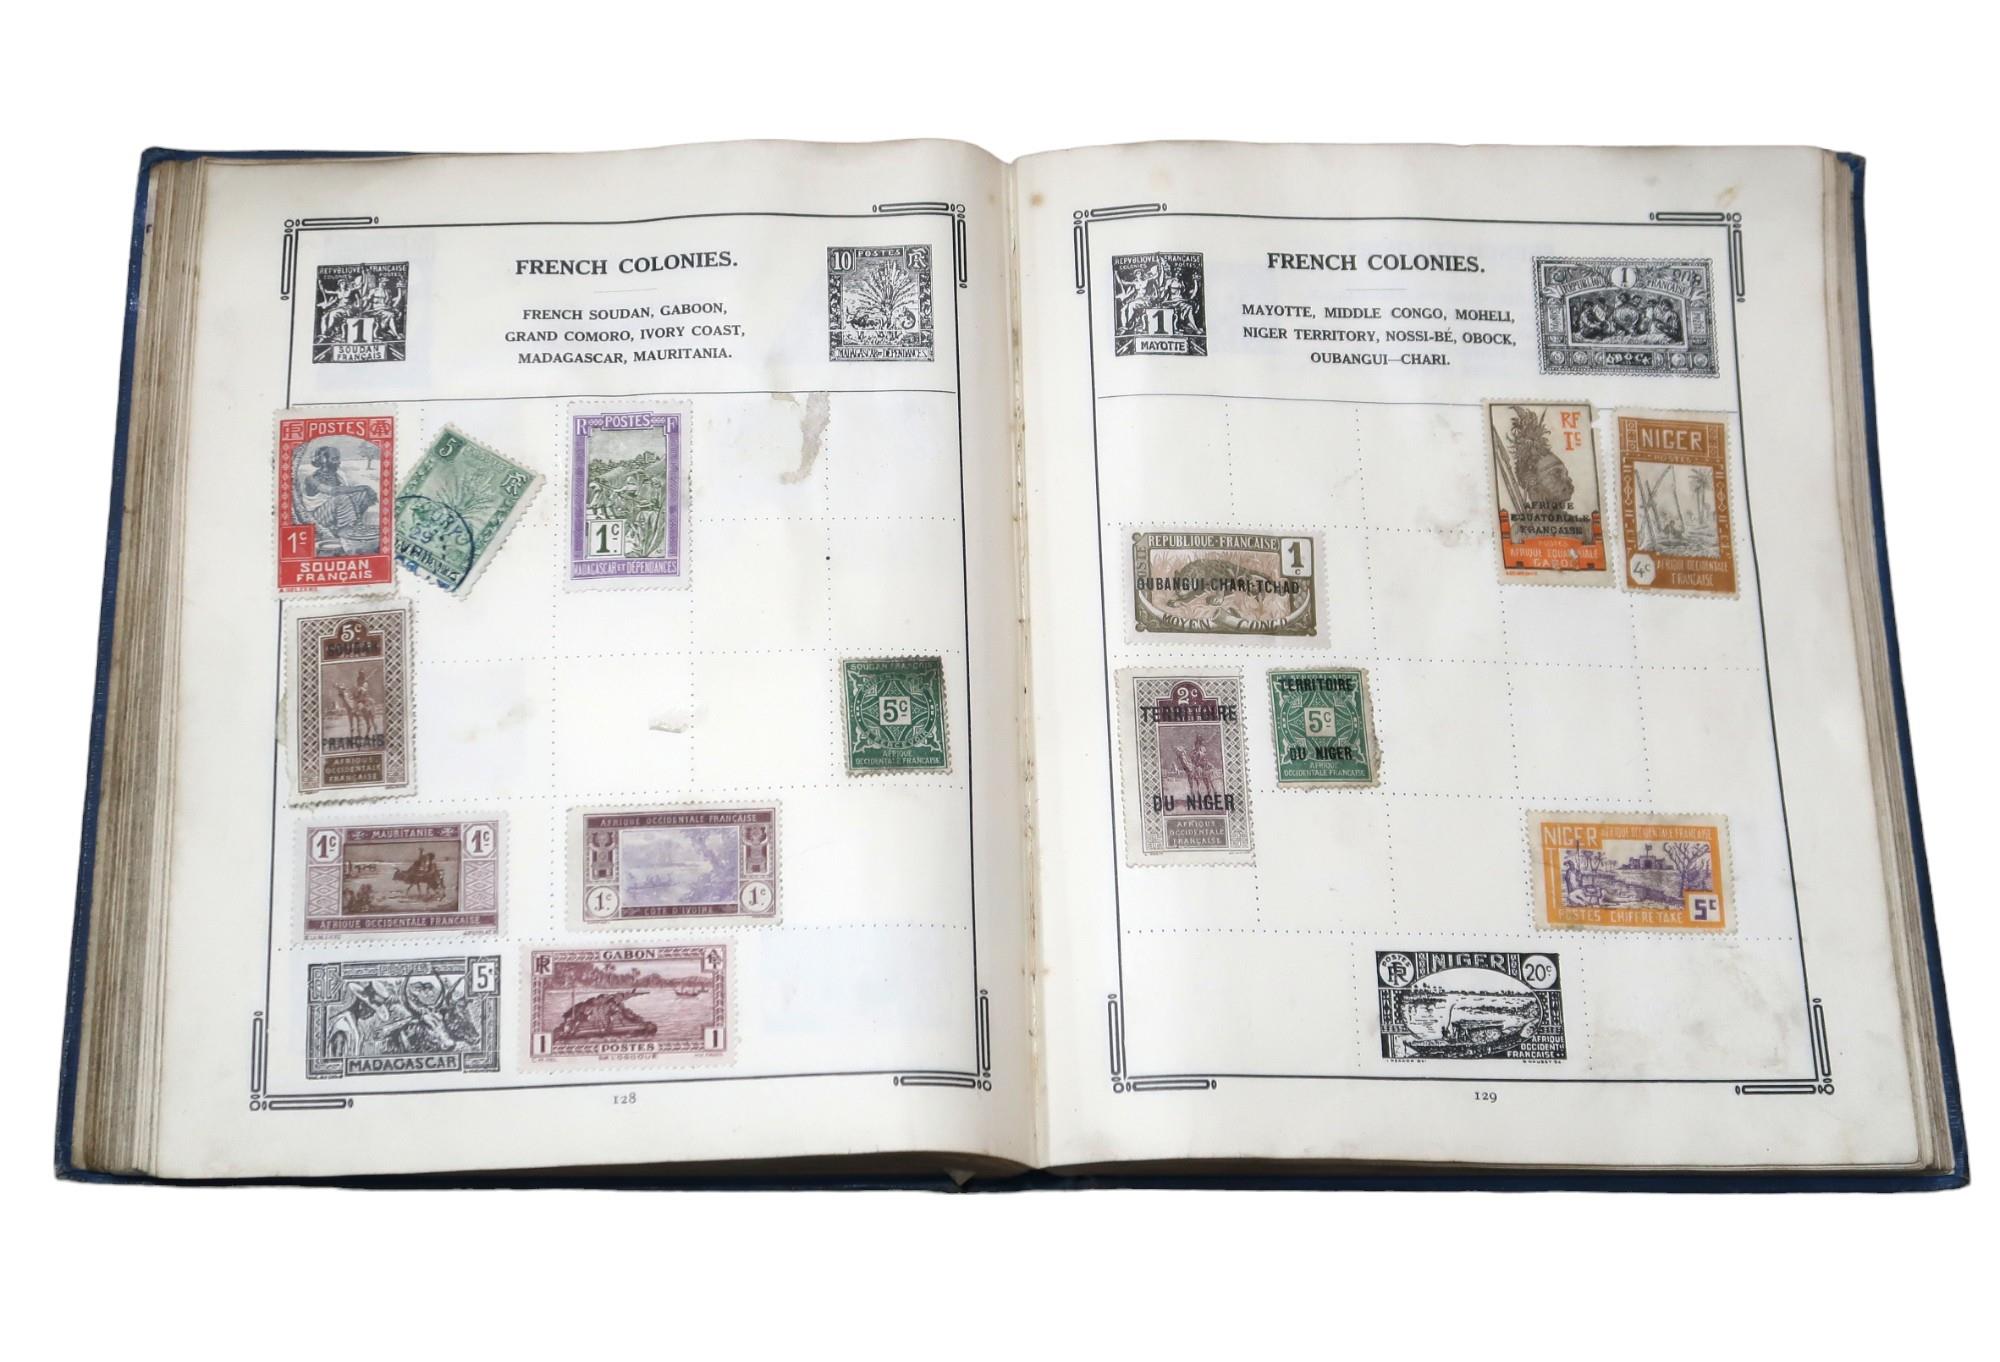 Stanley Gibbons The Improved Stamp Album to include Great Britain 1/d red, 1/d lilac, Victoria 1/ - Image 12 of 20